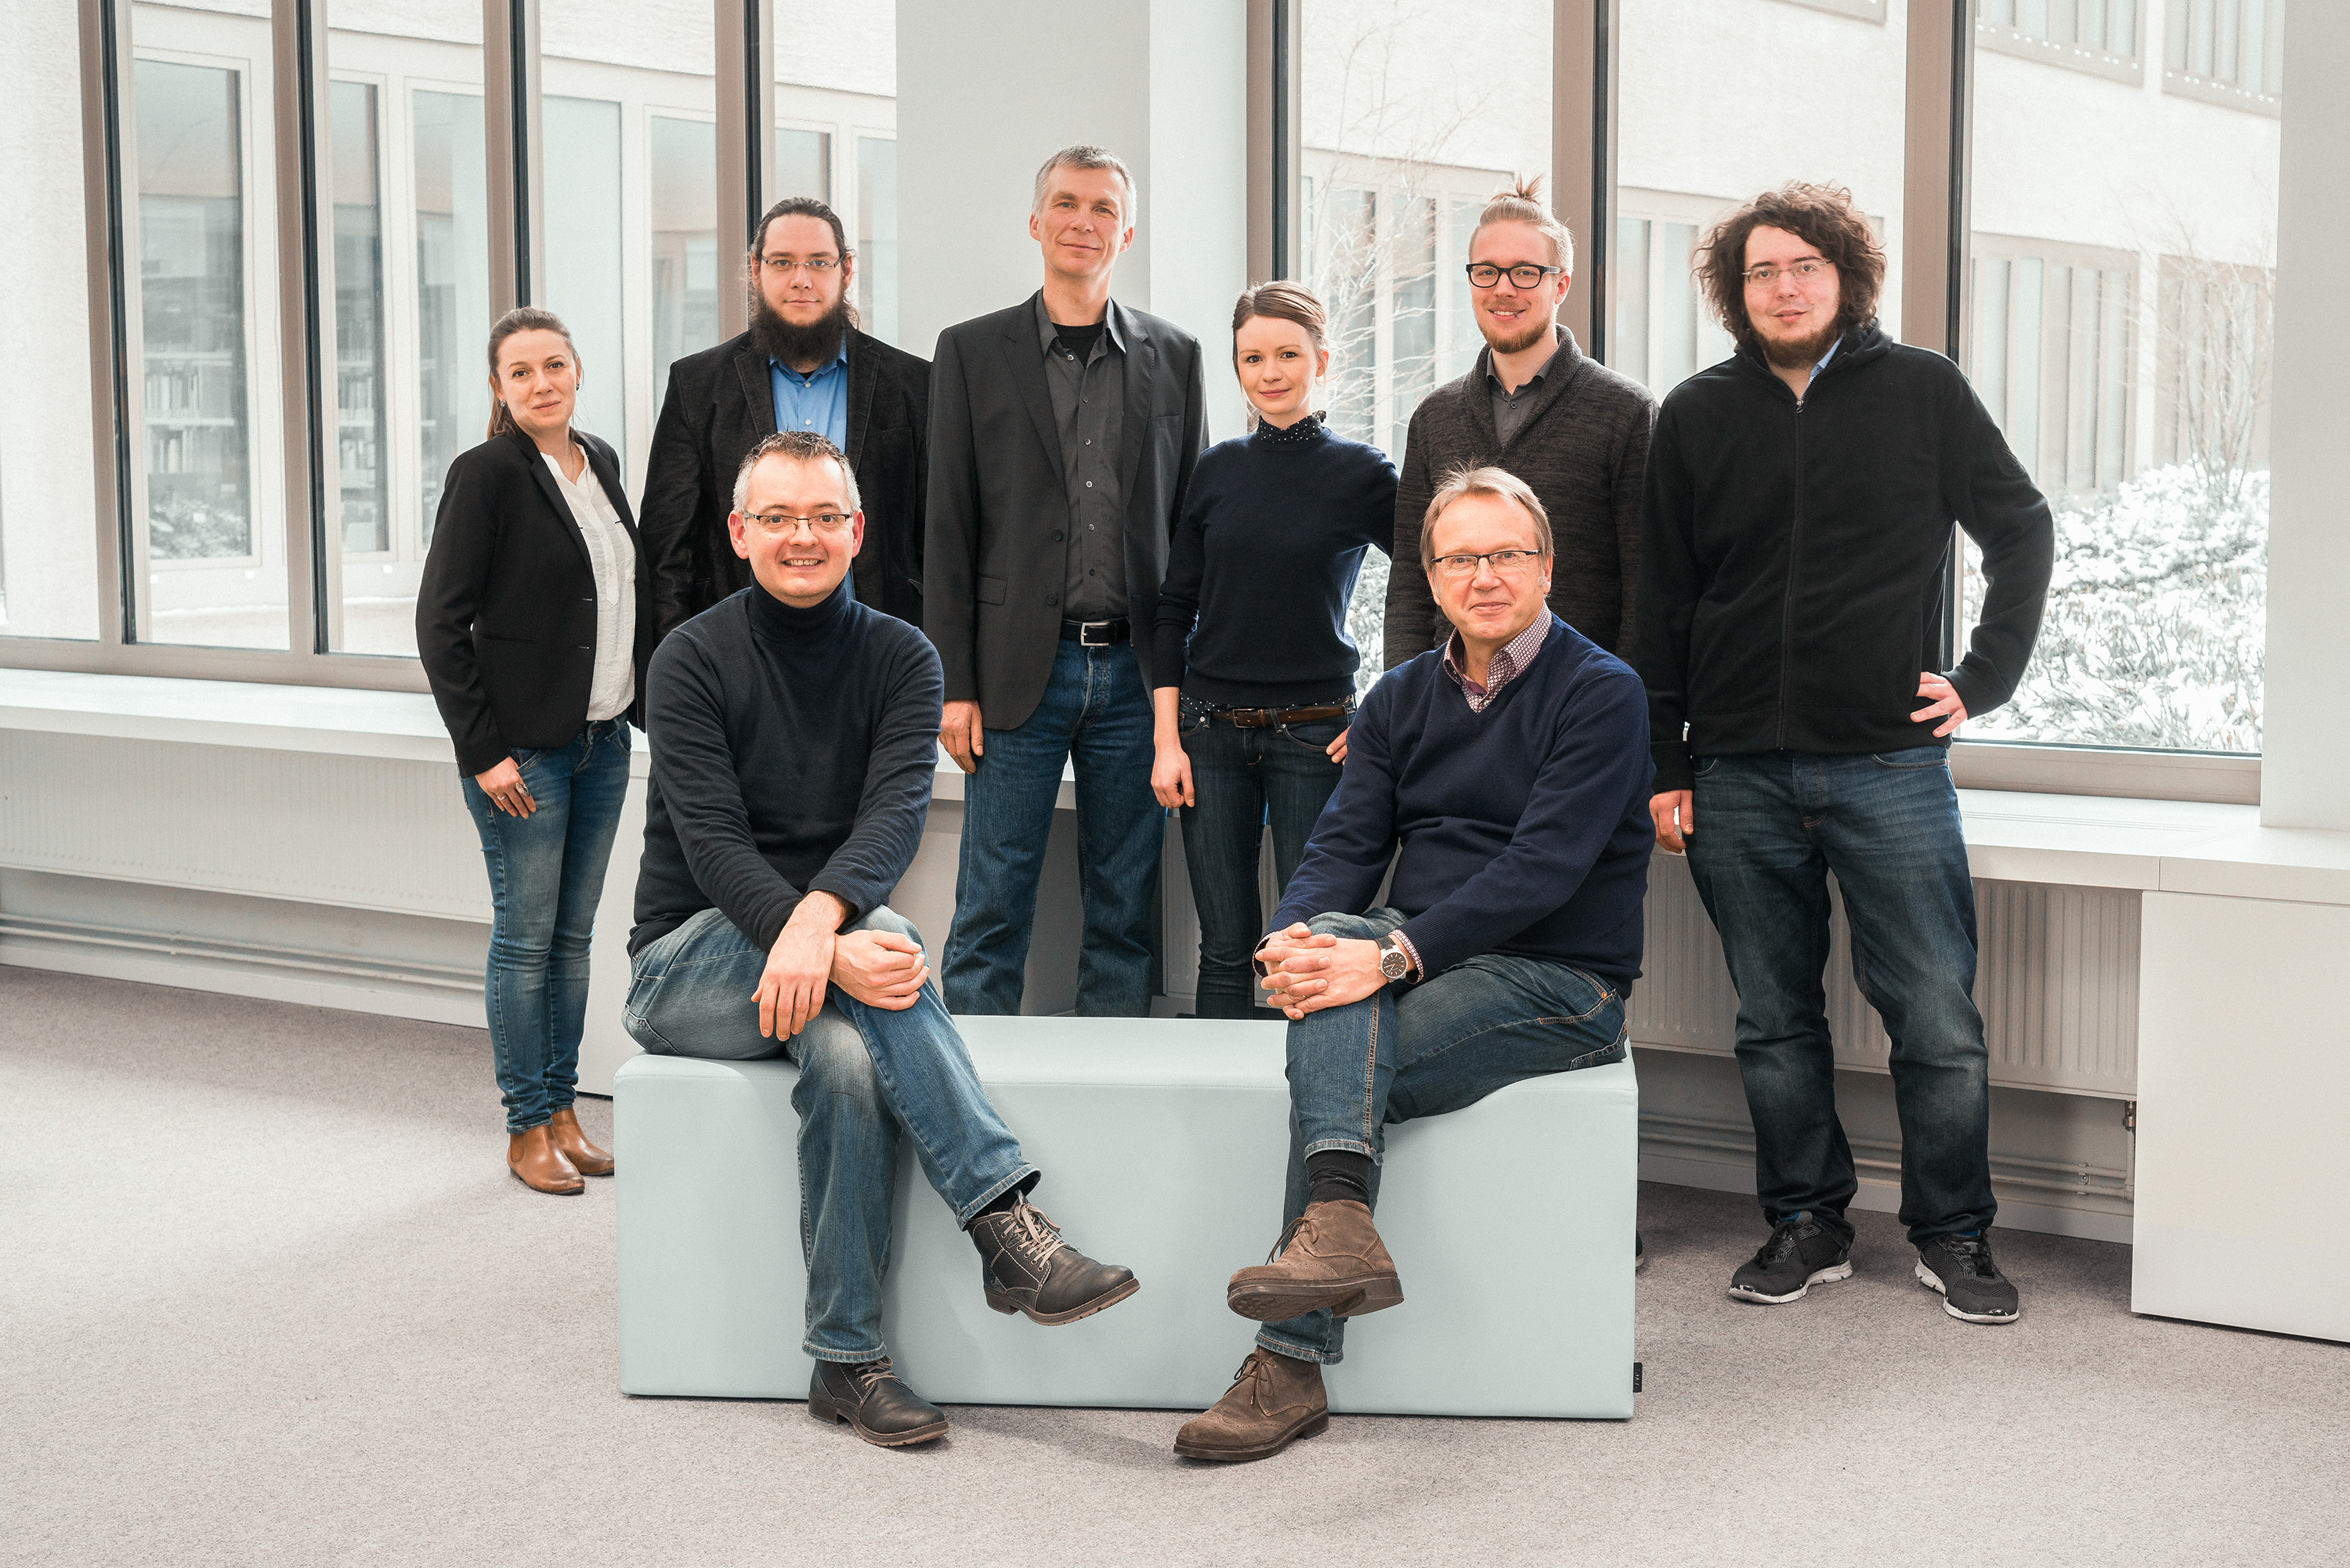 Osnabrück Universities' team members of Philosophy of Mind and Cogntion